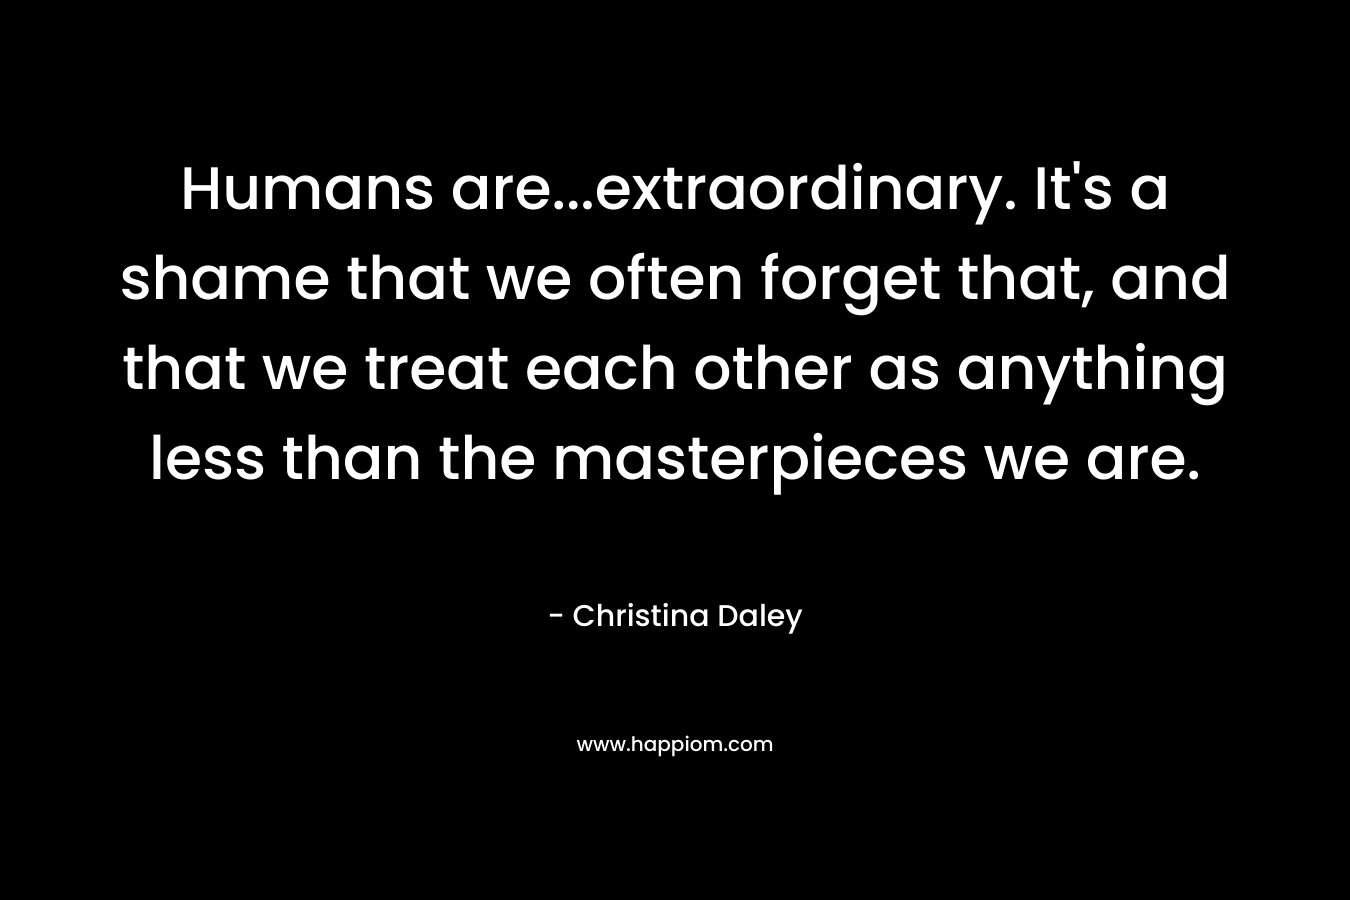 Humans are…extraordinary. It’s a shame that we often forget that, and that we treat each other as anything less than the masterpieces we are. – Christina Daley